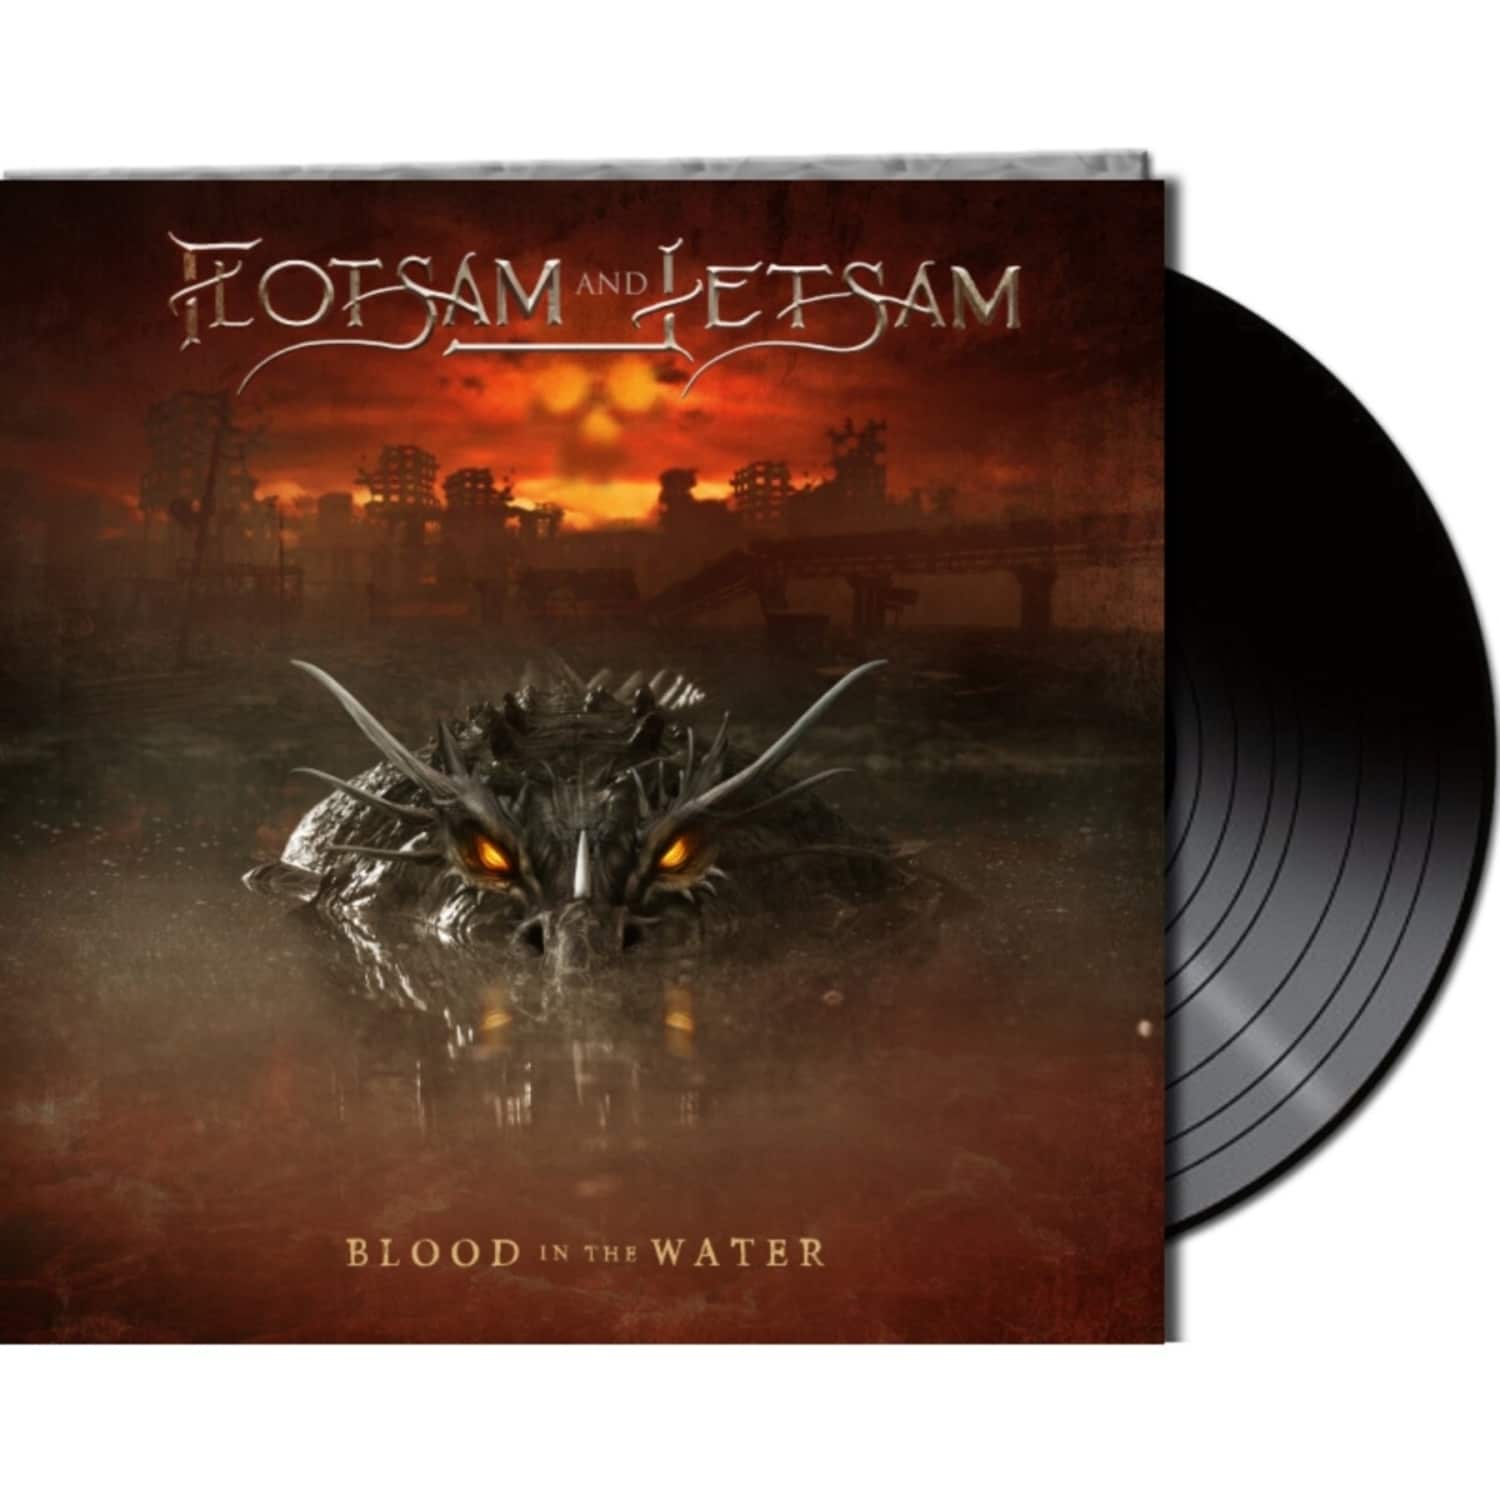 Flotsam And Jetsam - BLOOD IN THE WATER 